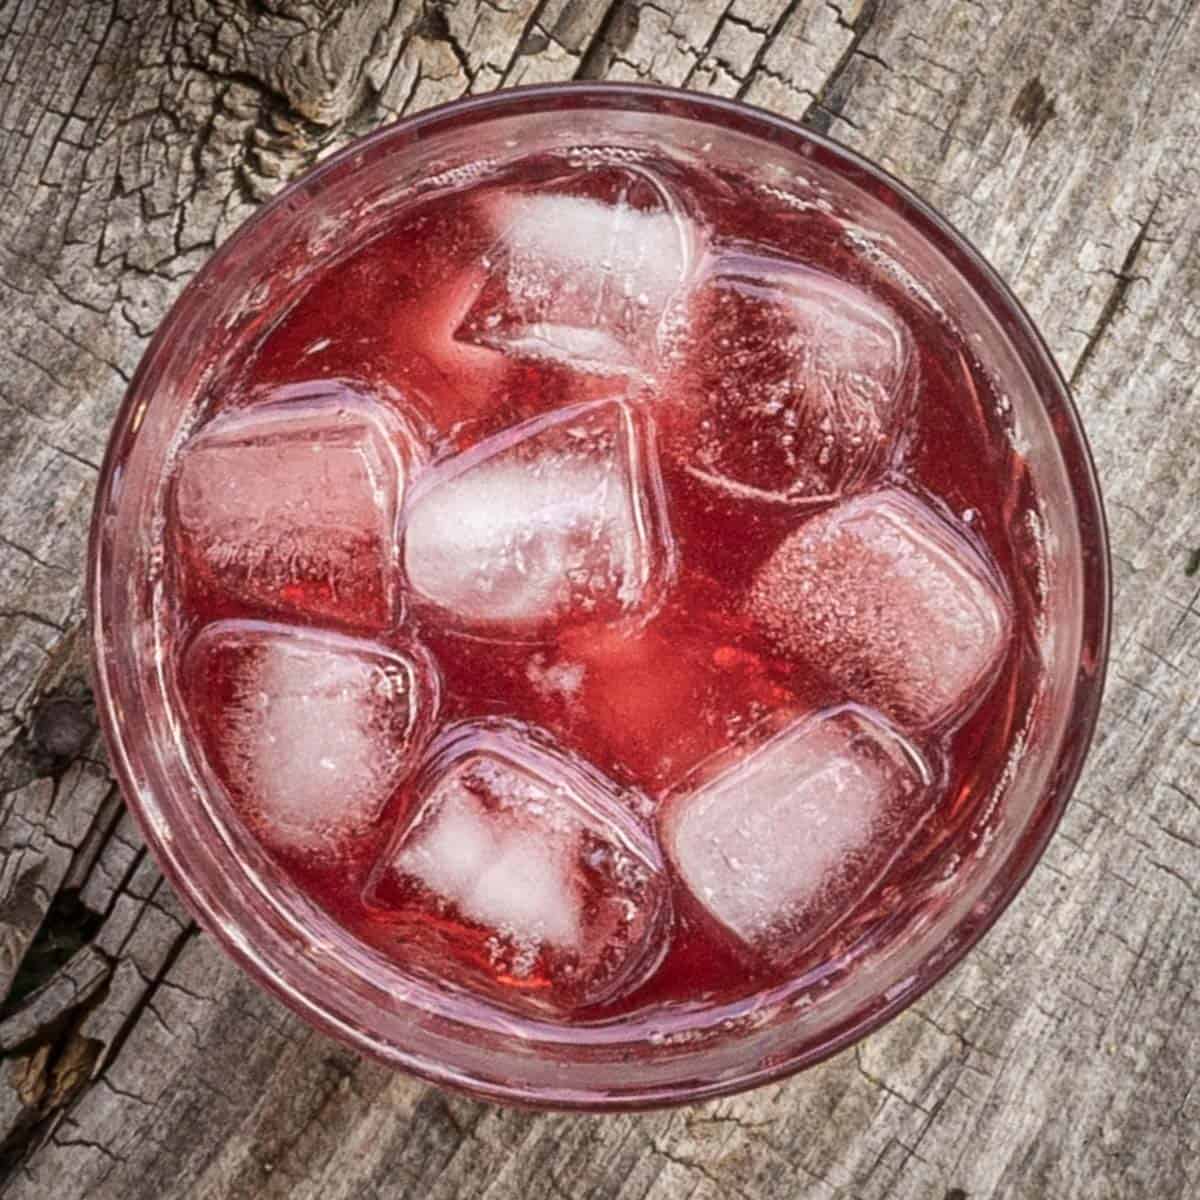 A glass filled with a red cocktail and ice on a grey wood background.